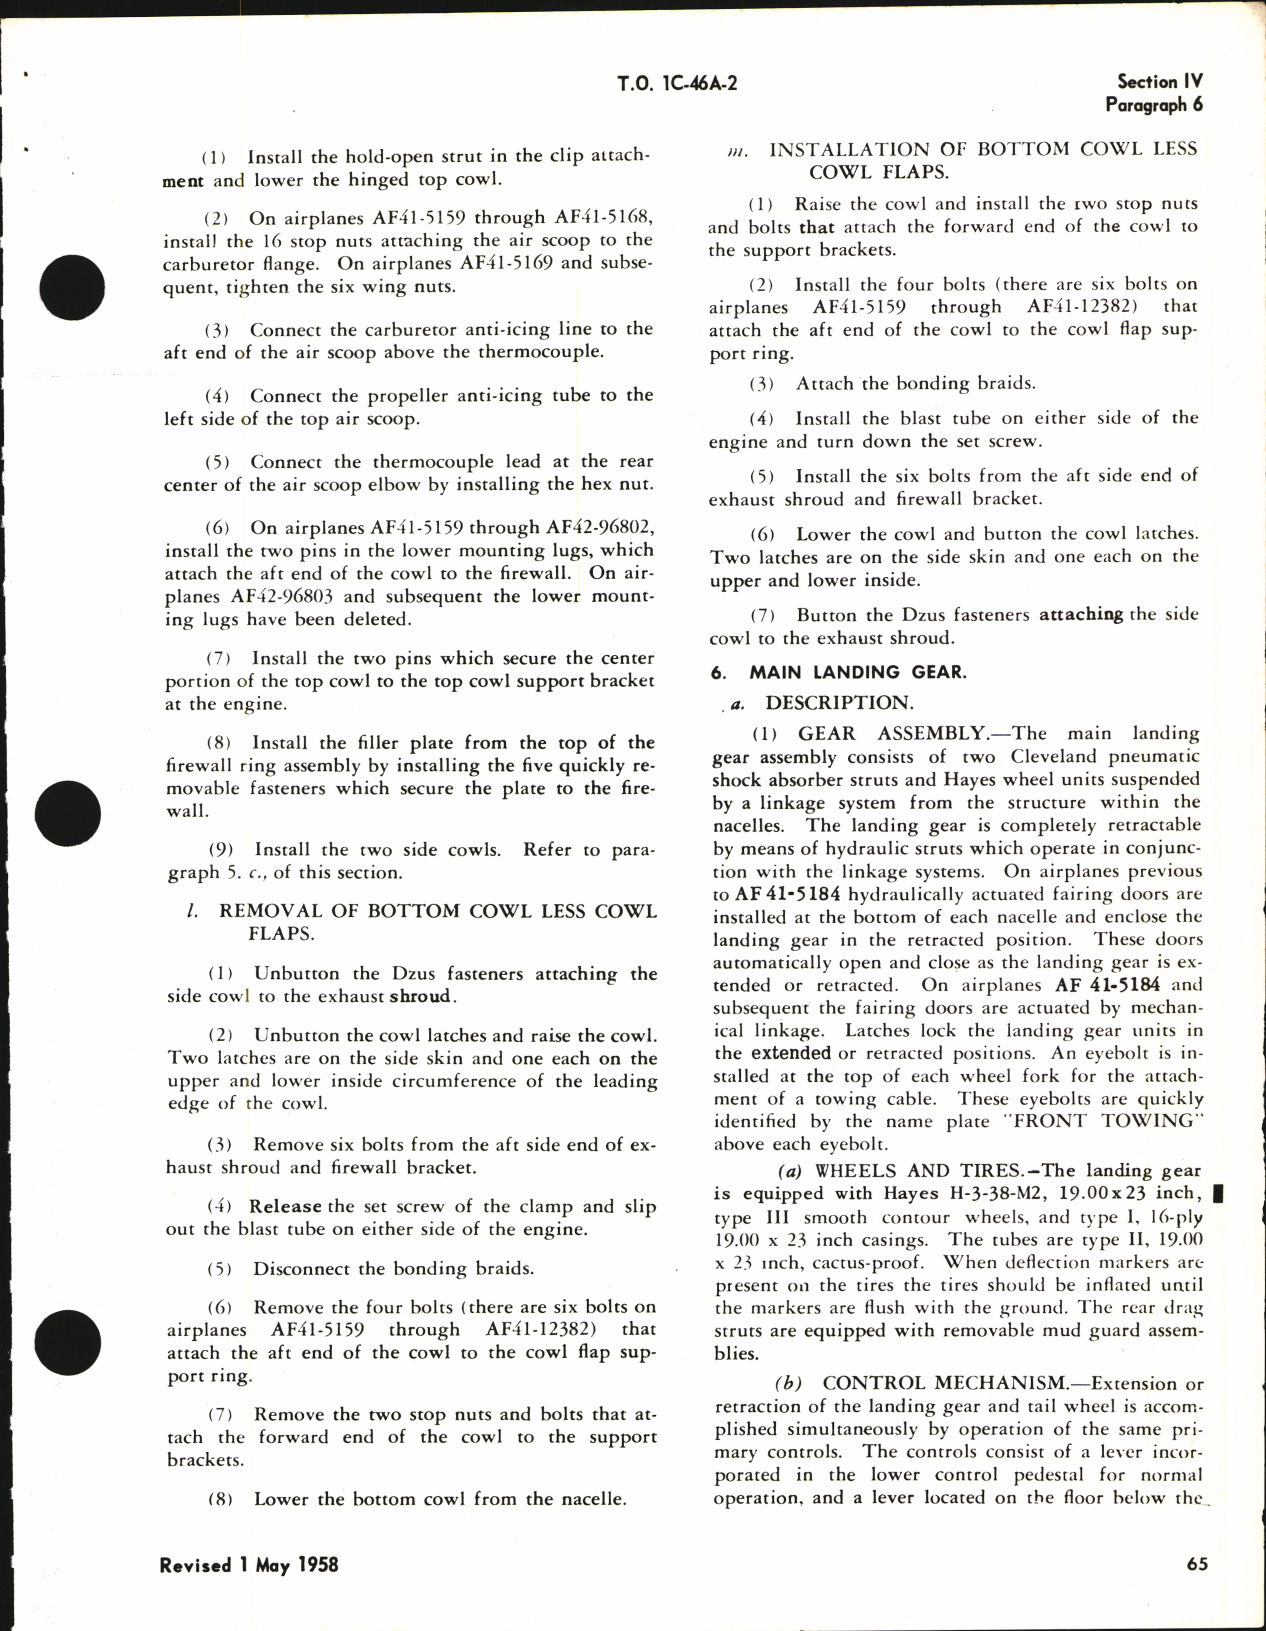 Sample page 5 from AirCorps Library document: Maintenance Instructions for C-46, ZC-46A, C-46D, C-46F, and R5C-1